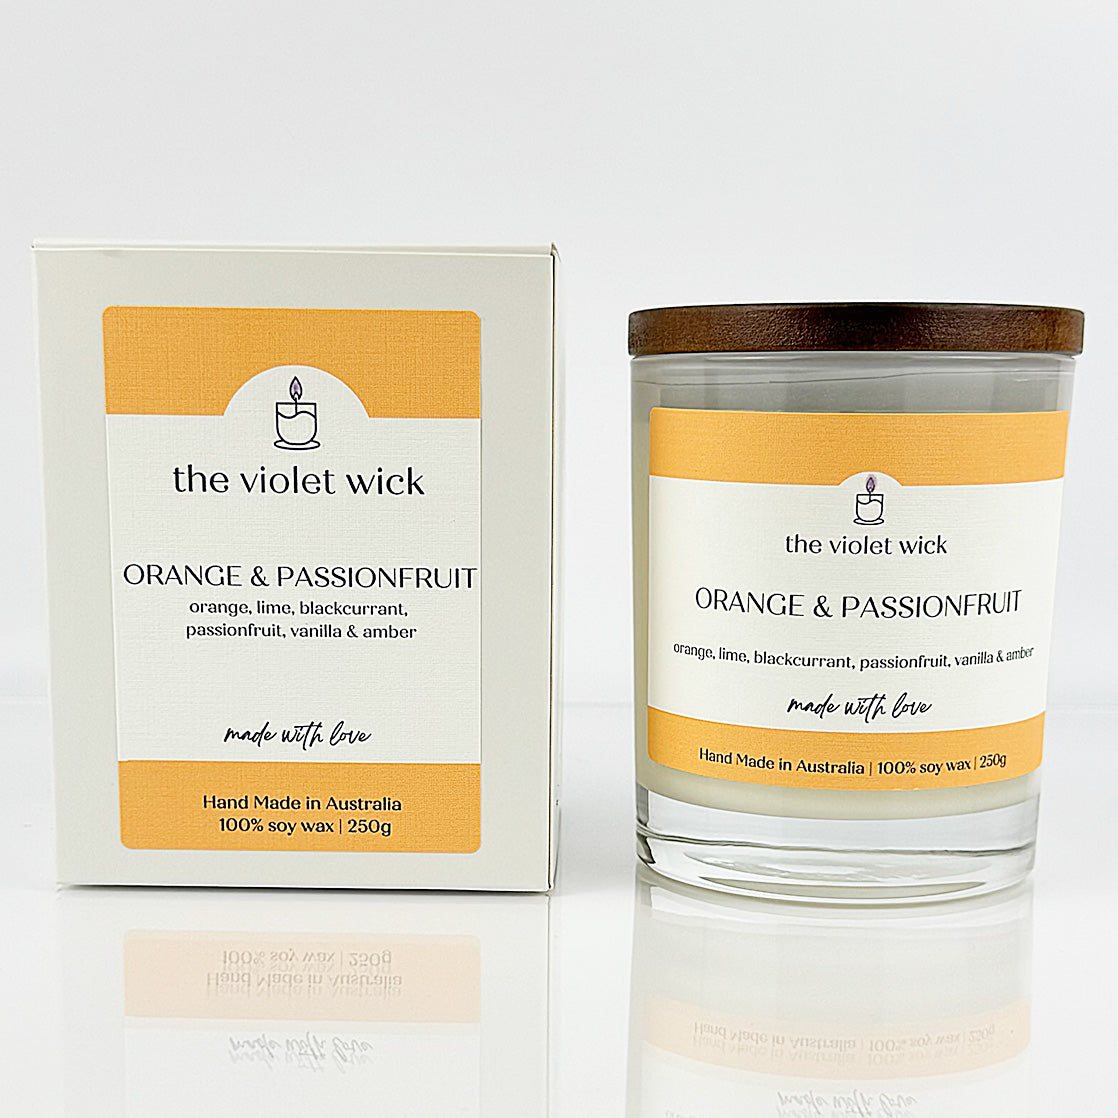 Orange & Passionfruit scented soy candle from The Violet Wick in glass jar with timber lid, 250g.